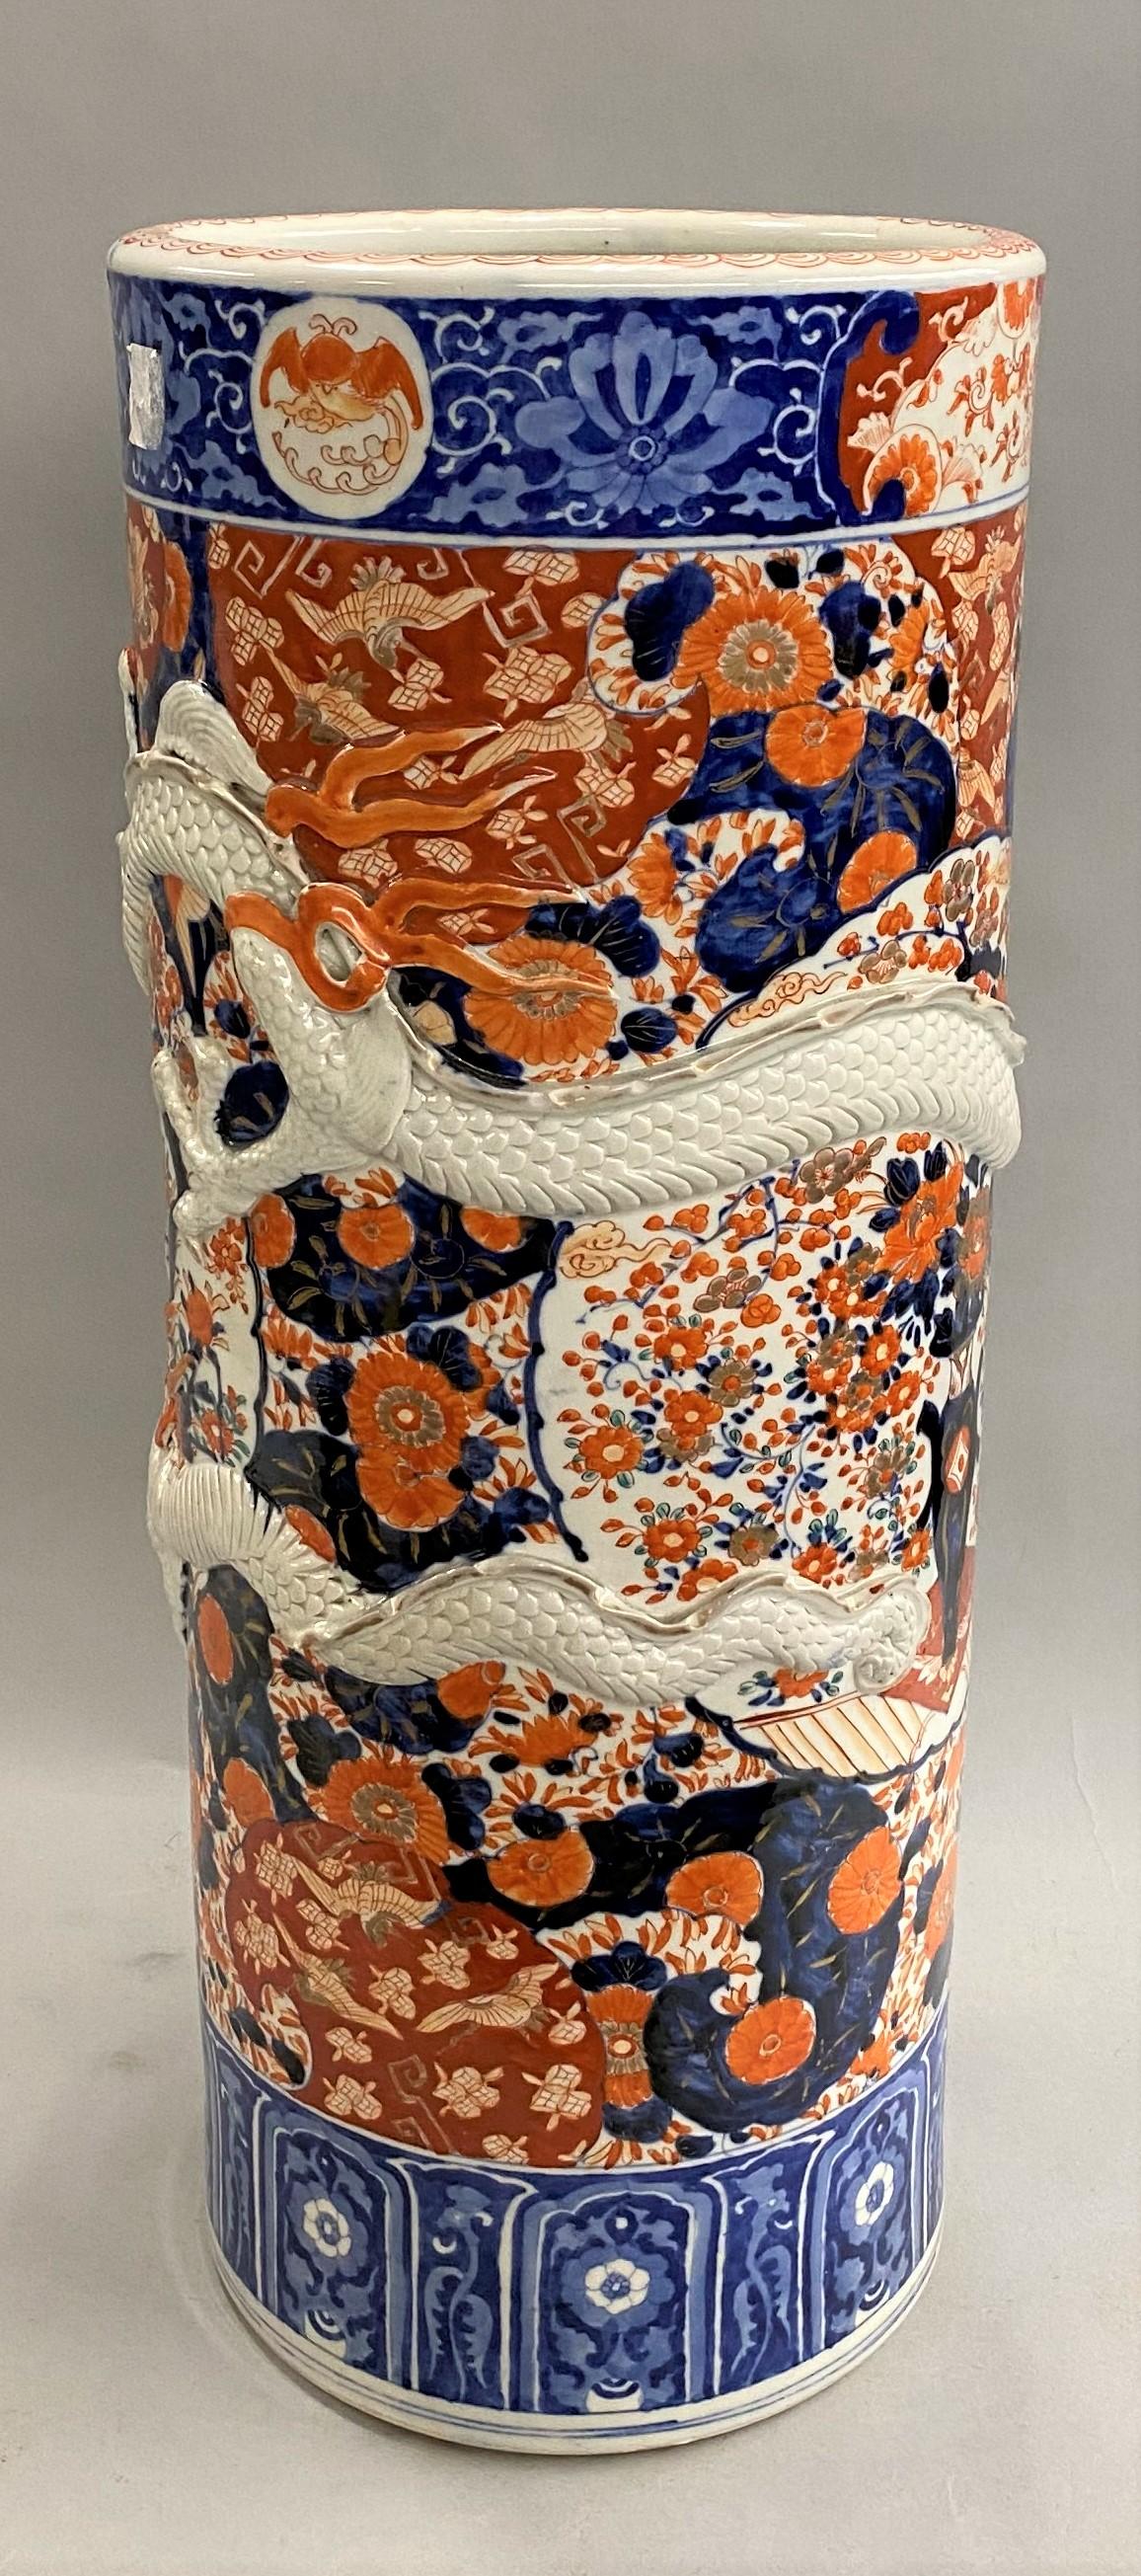 A fine Japanese Imari stick stand or umbrella stand in blue, gilt, and iron red tones with bird and foliate decoration, as well as a relief white dragon with gilt highlights wrapping around the exterior of the cylinder. The stand dates to the late